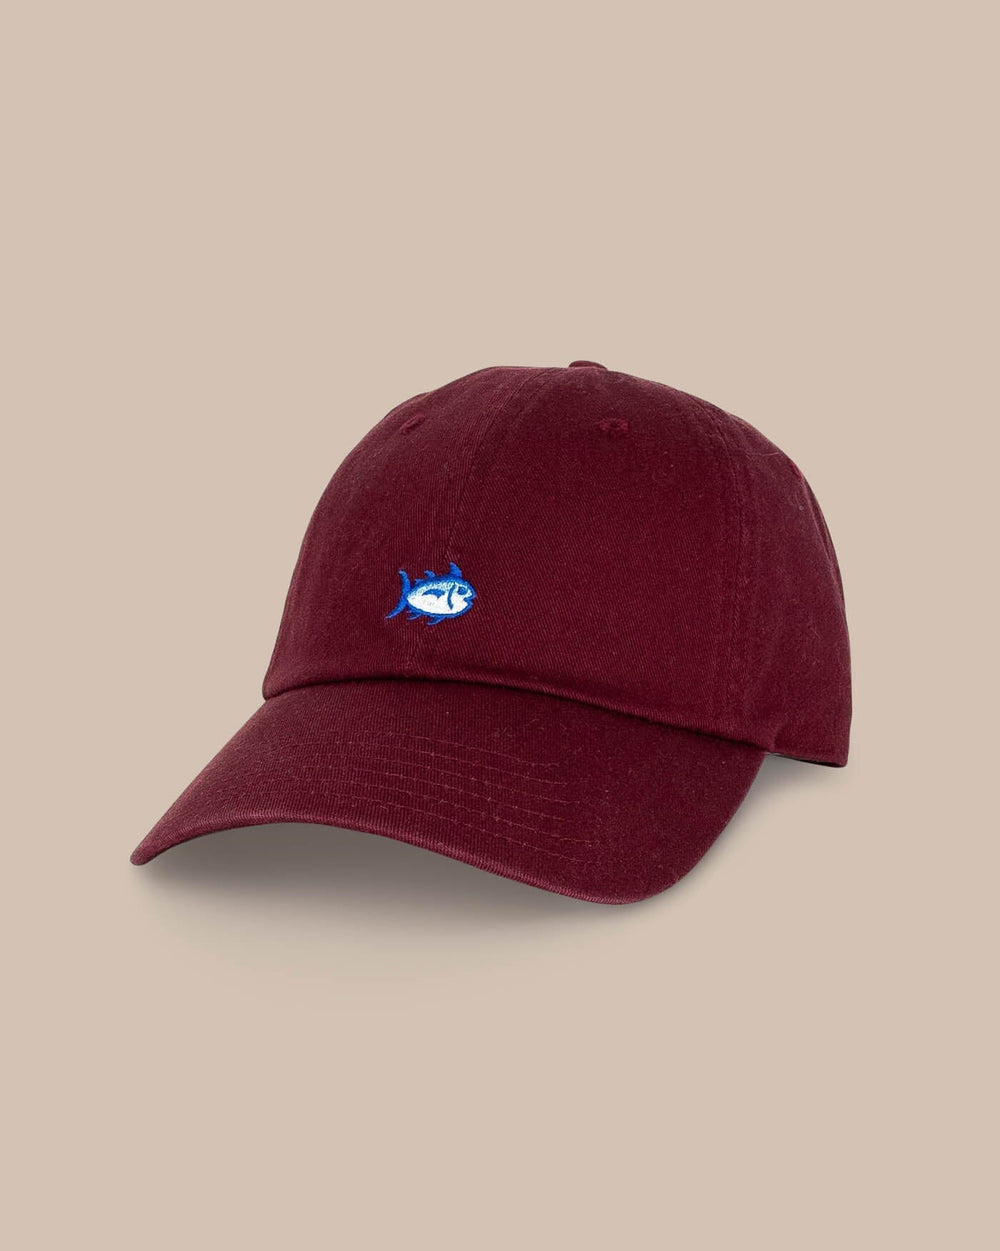 The front view of the Southern Tide mini-skipjack-leather-strap-hat-3 by Southern Tide - Maroon